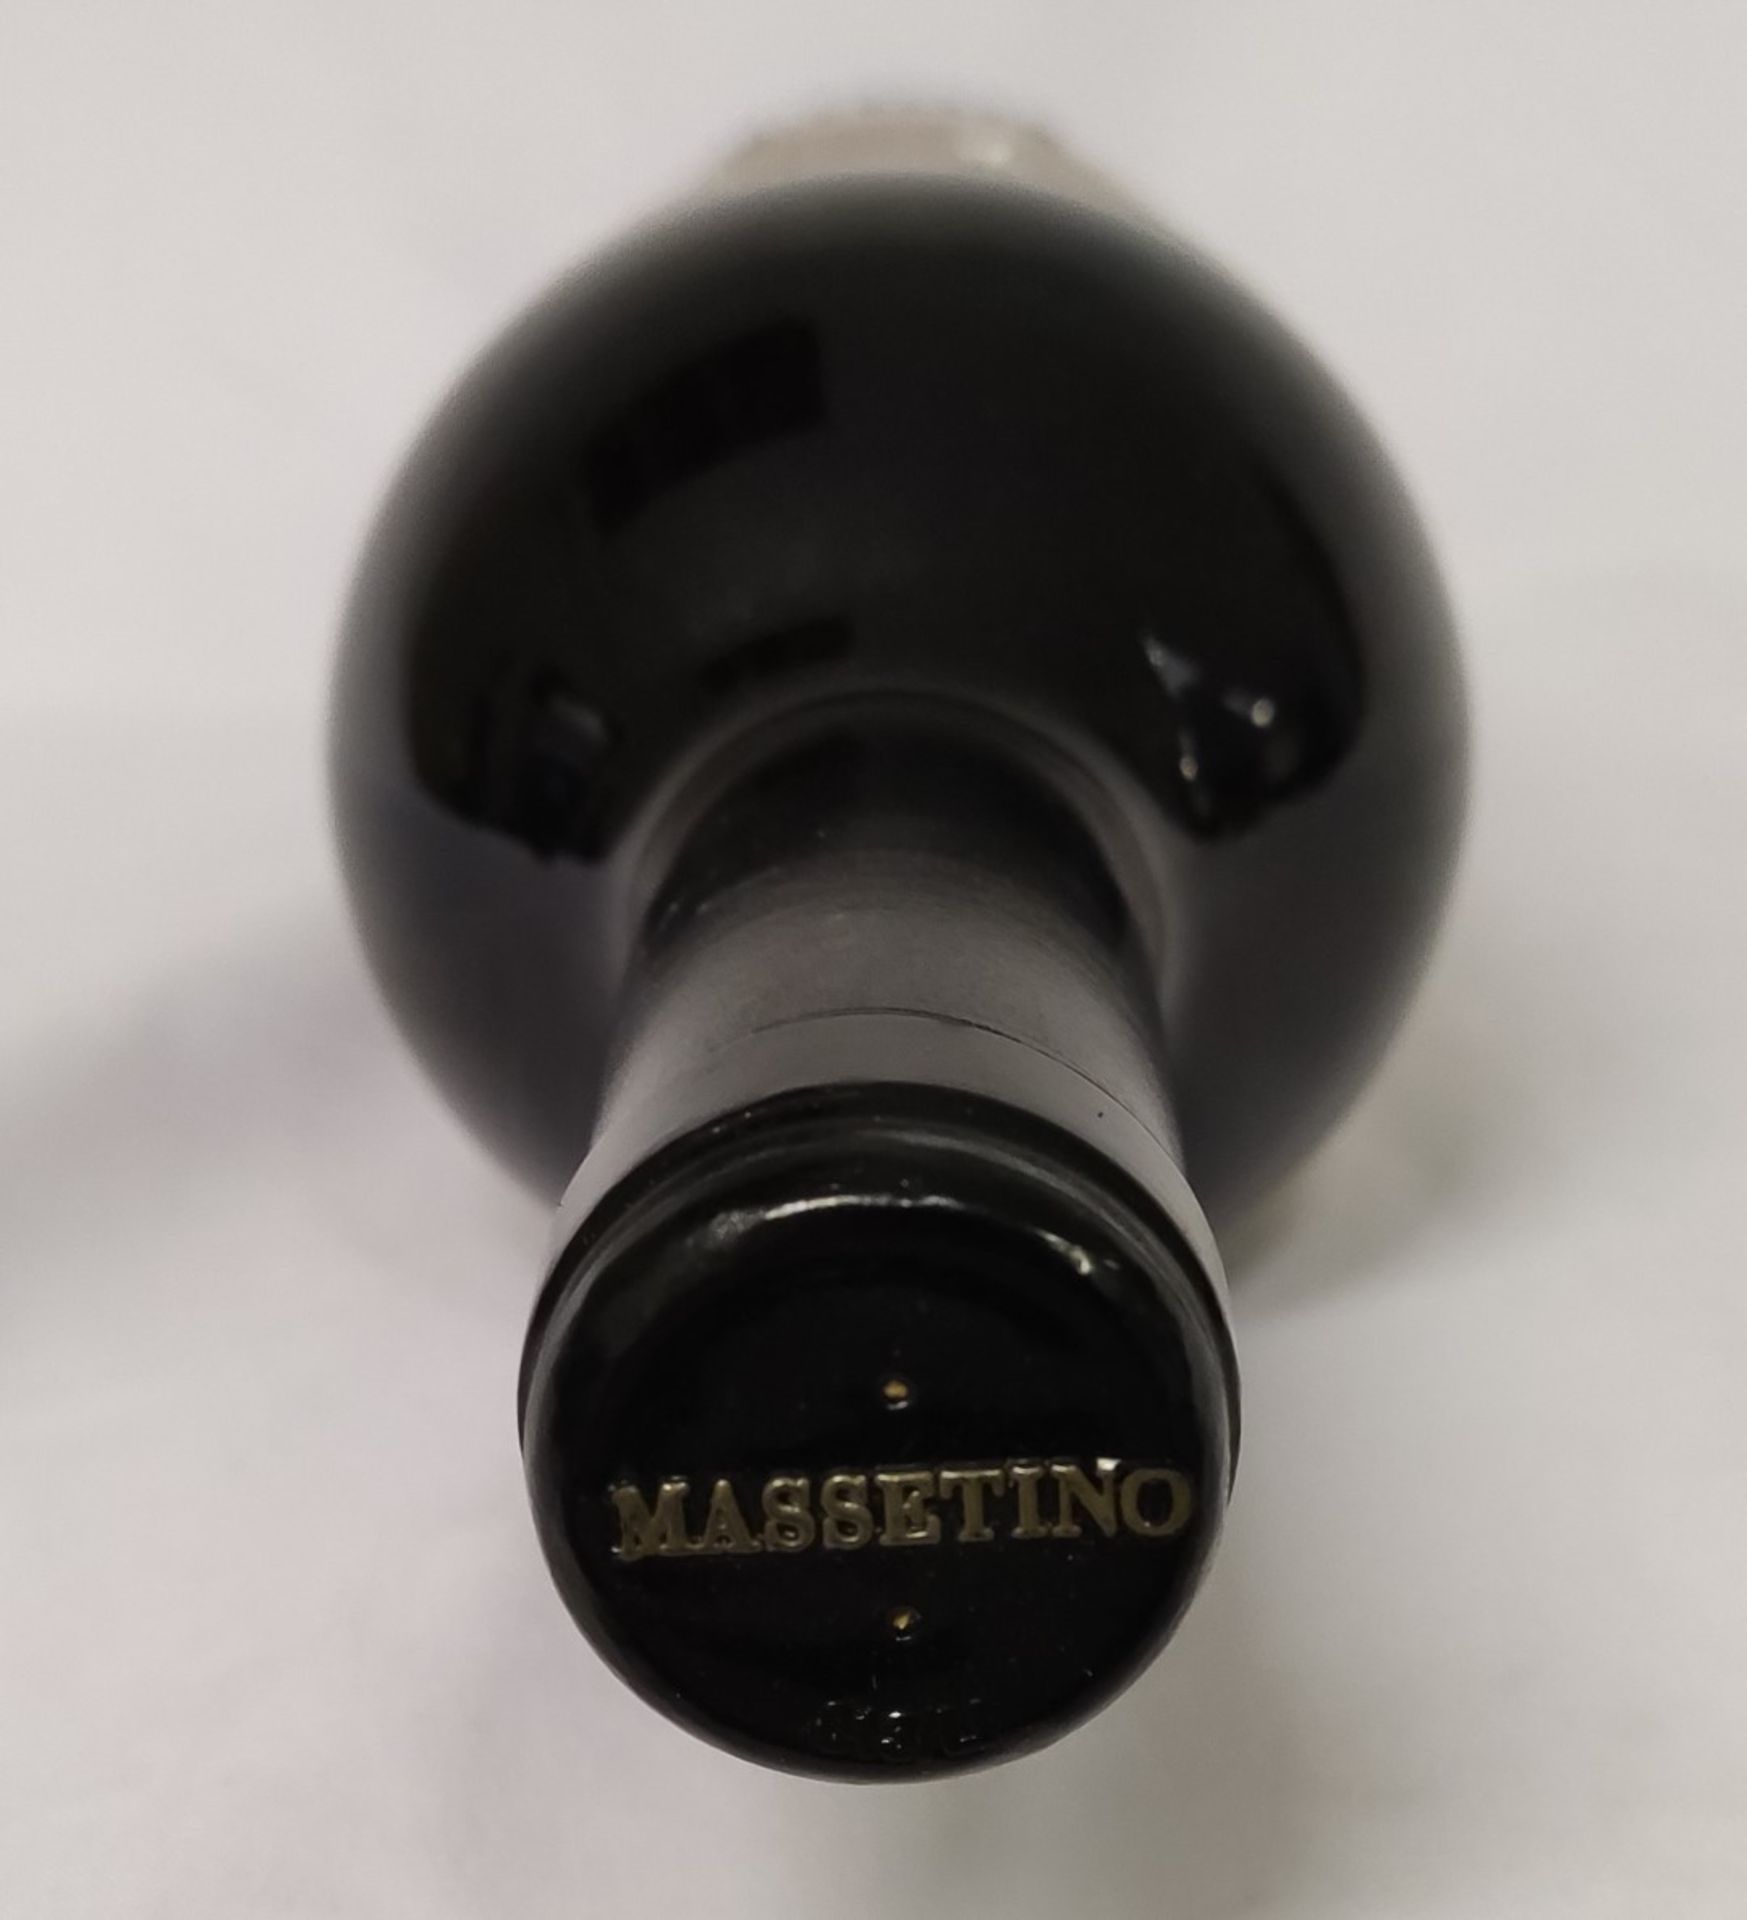 1 x Bottle of 2018 Massetino Toscana IGT Red Wine, Tuscany, Italy - Retail Price £375 - Ref: WAS315/ - Image 6 of 6